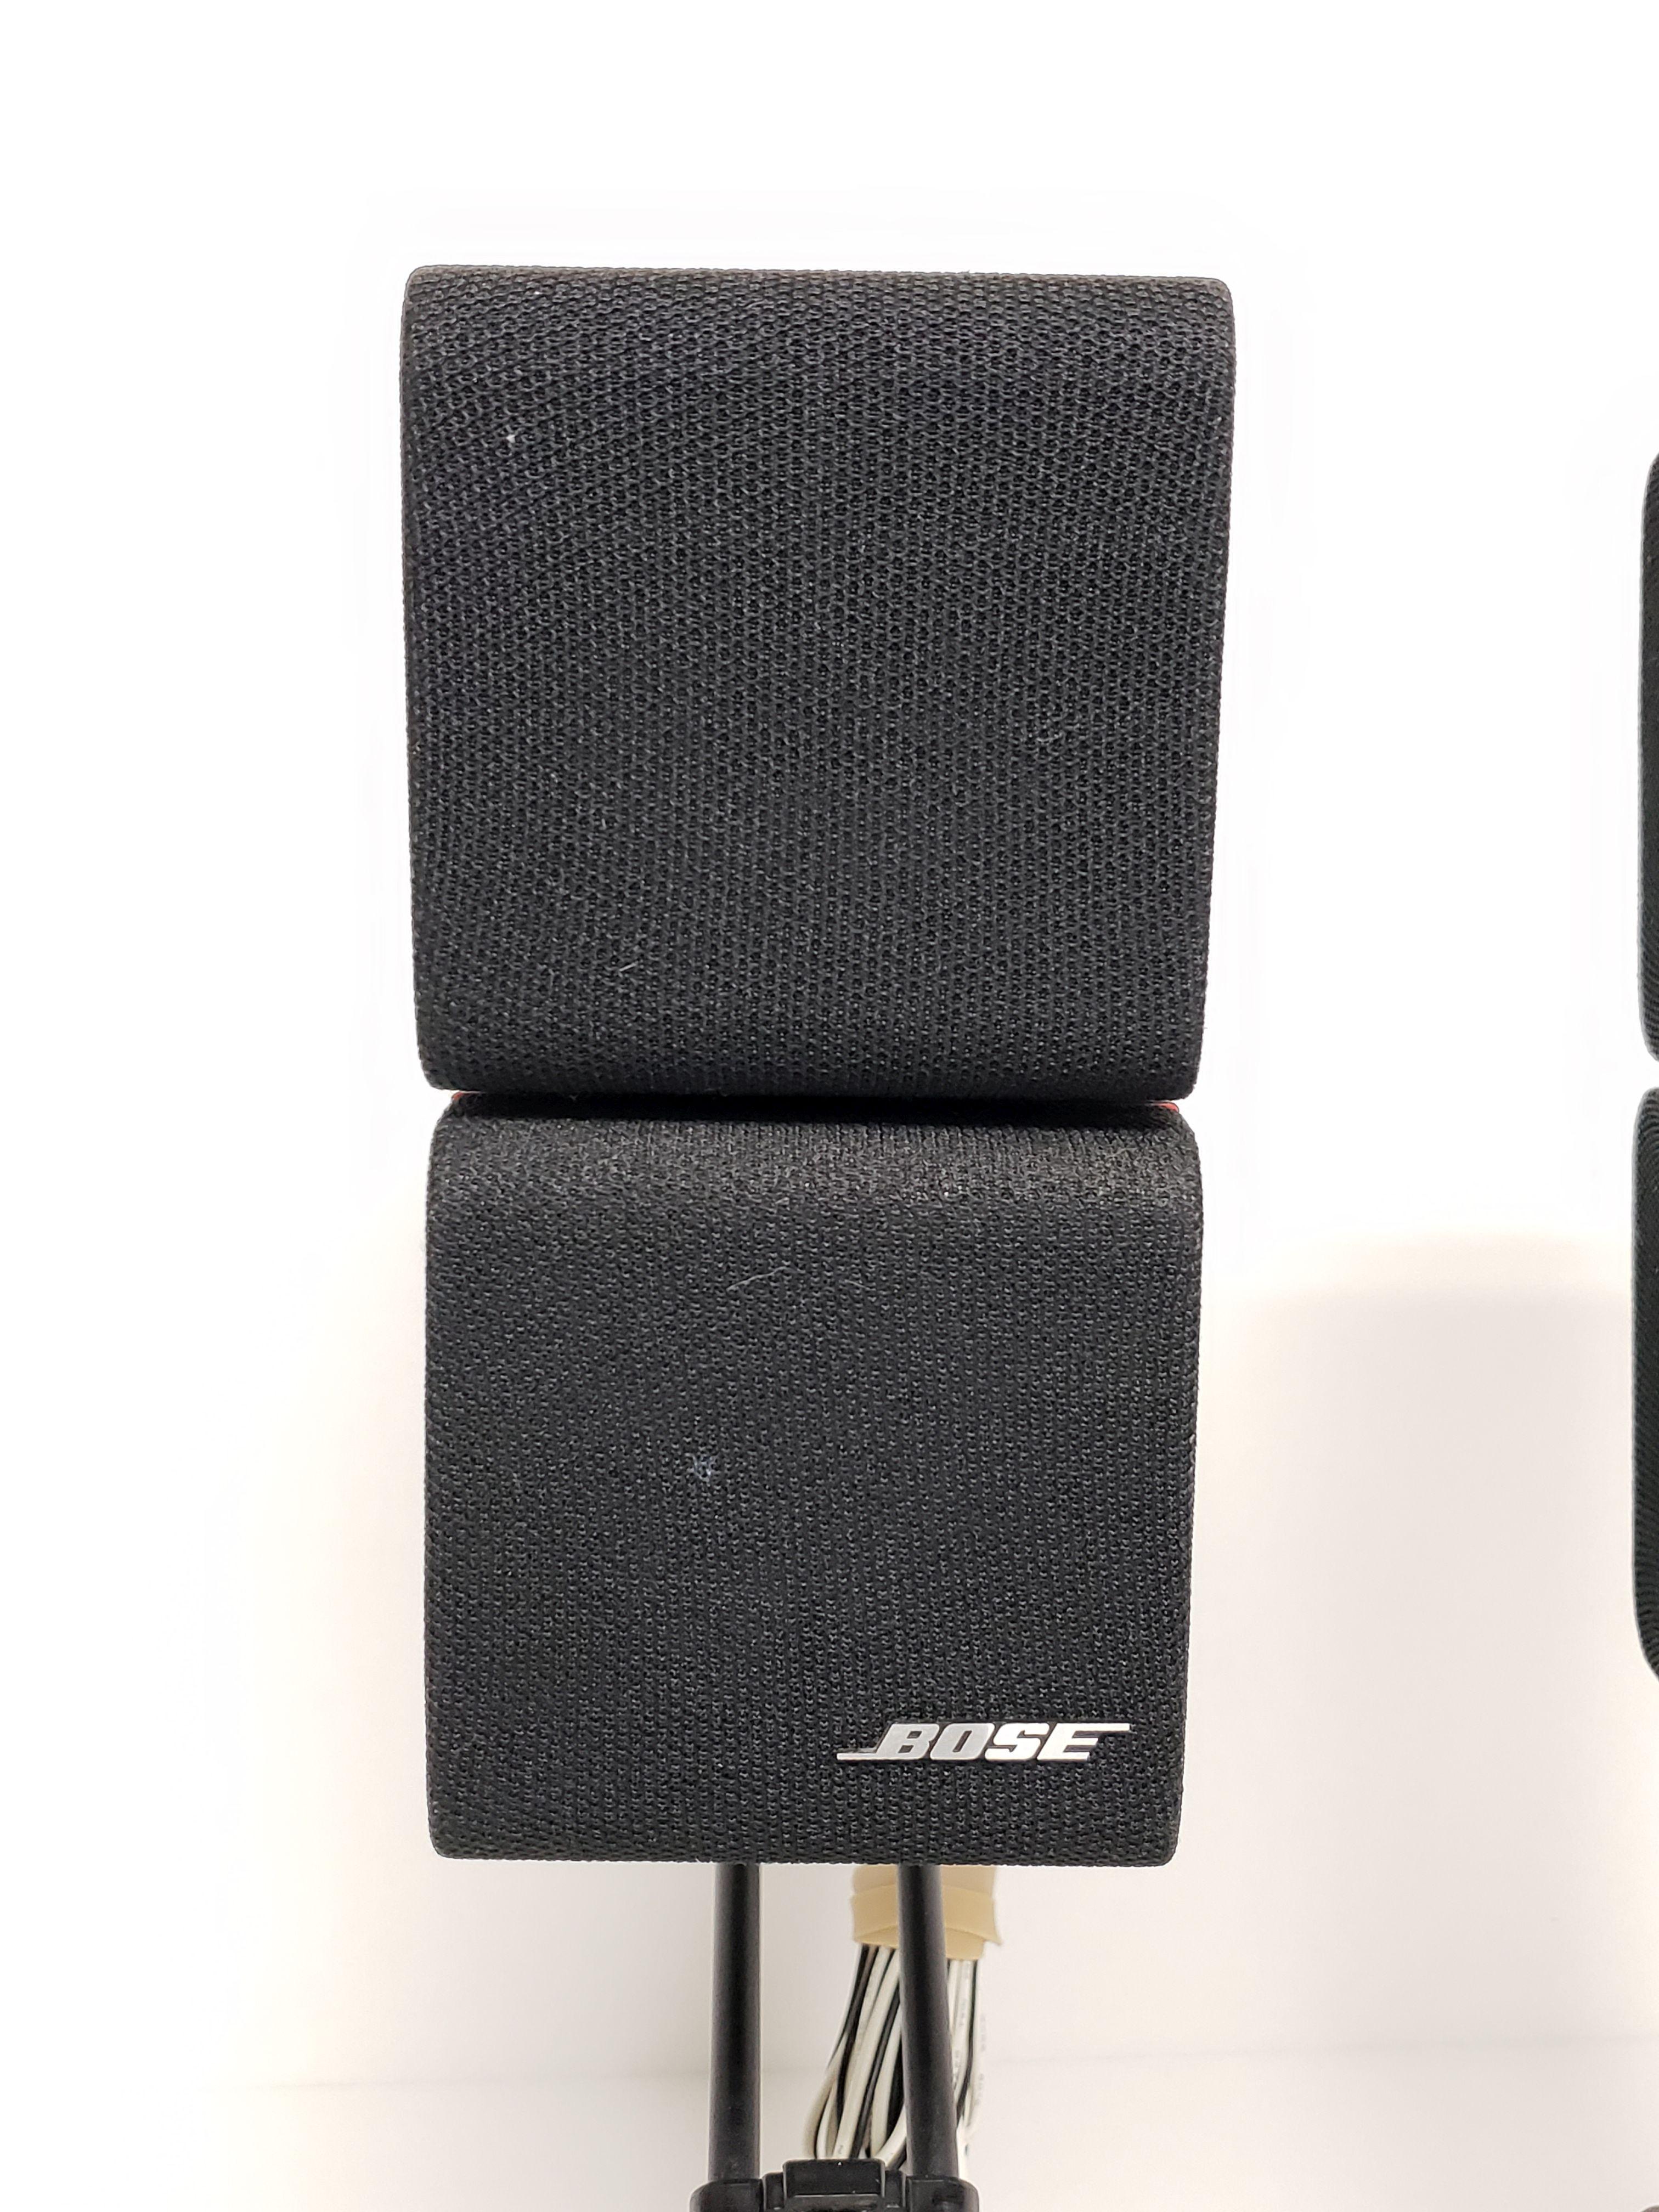 2 Bose Double Cube Red Line Speakers with Stands Cables